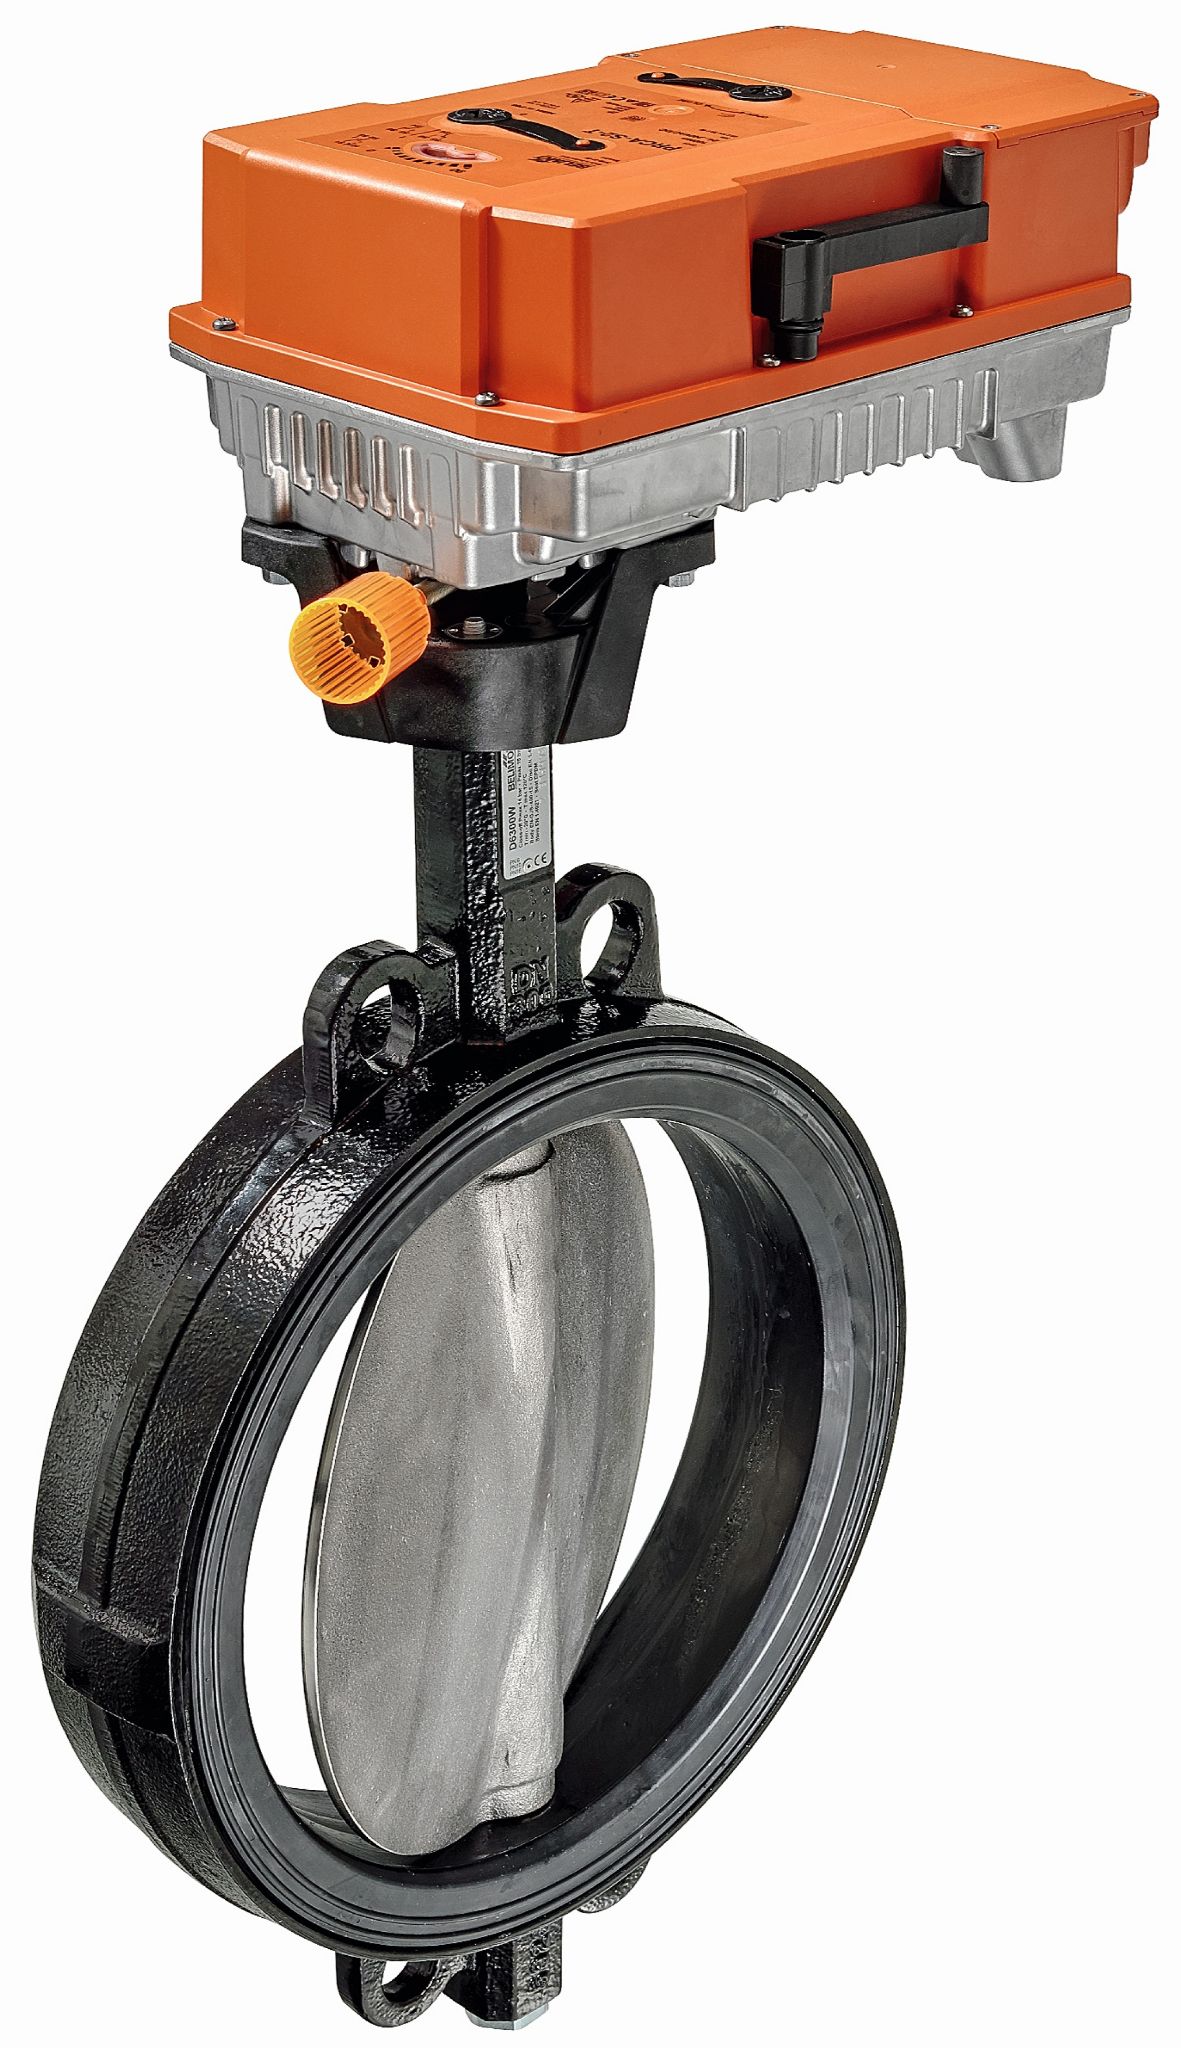 New butterfly valves and actuators from Belimo